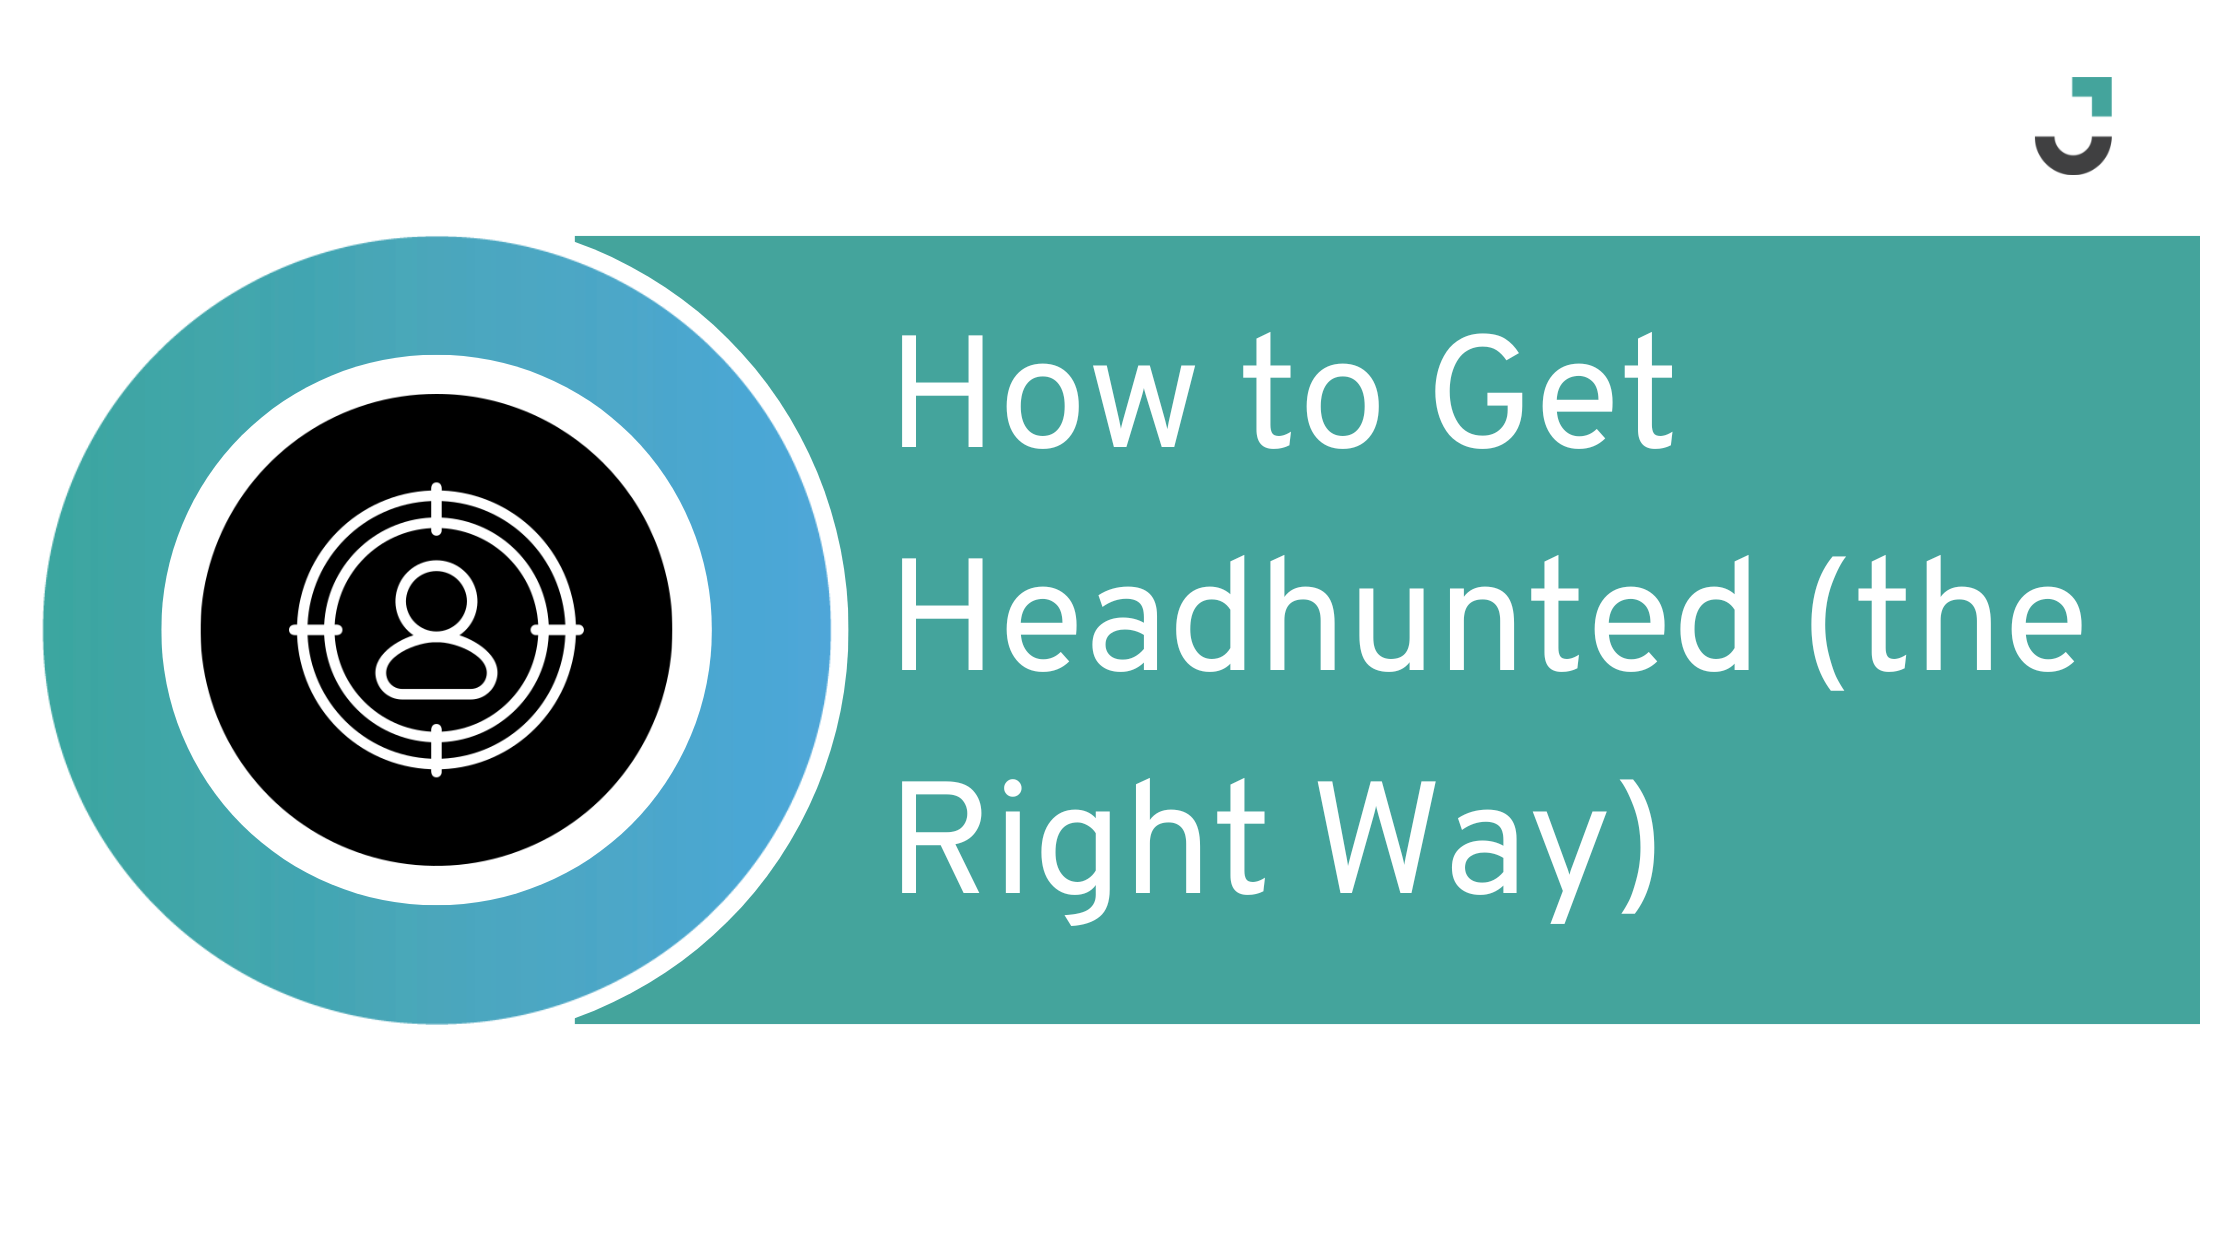 How to Get Headhunted (the Right Way)